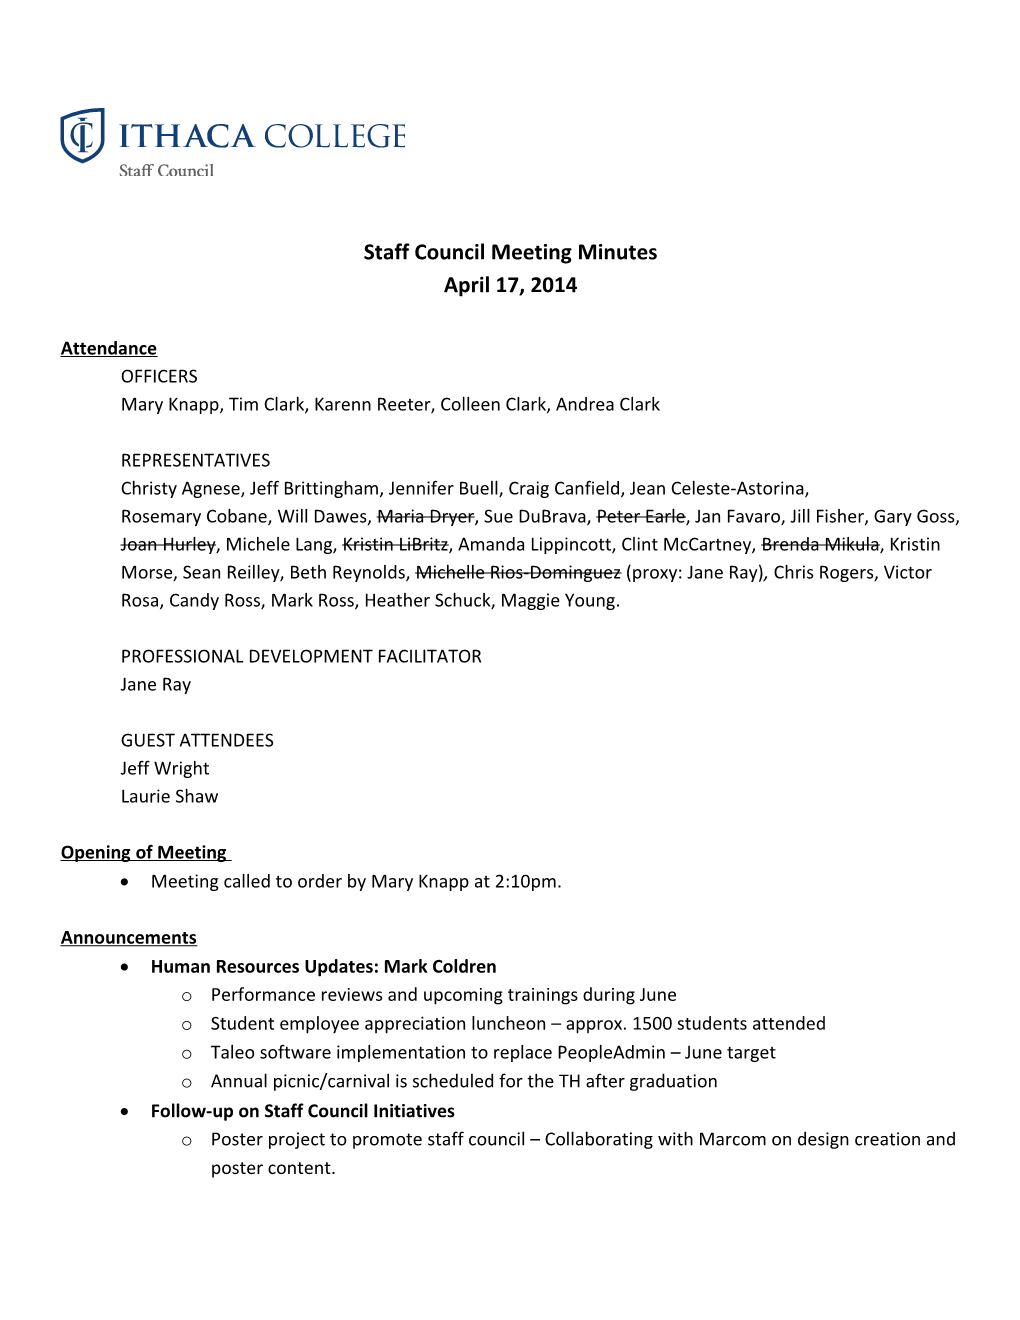 Staff Council Meeting Minutes s4